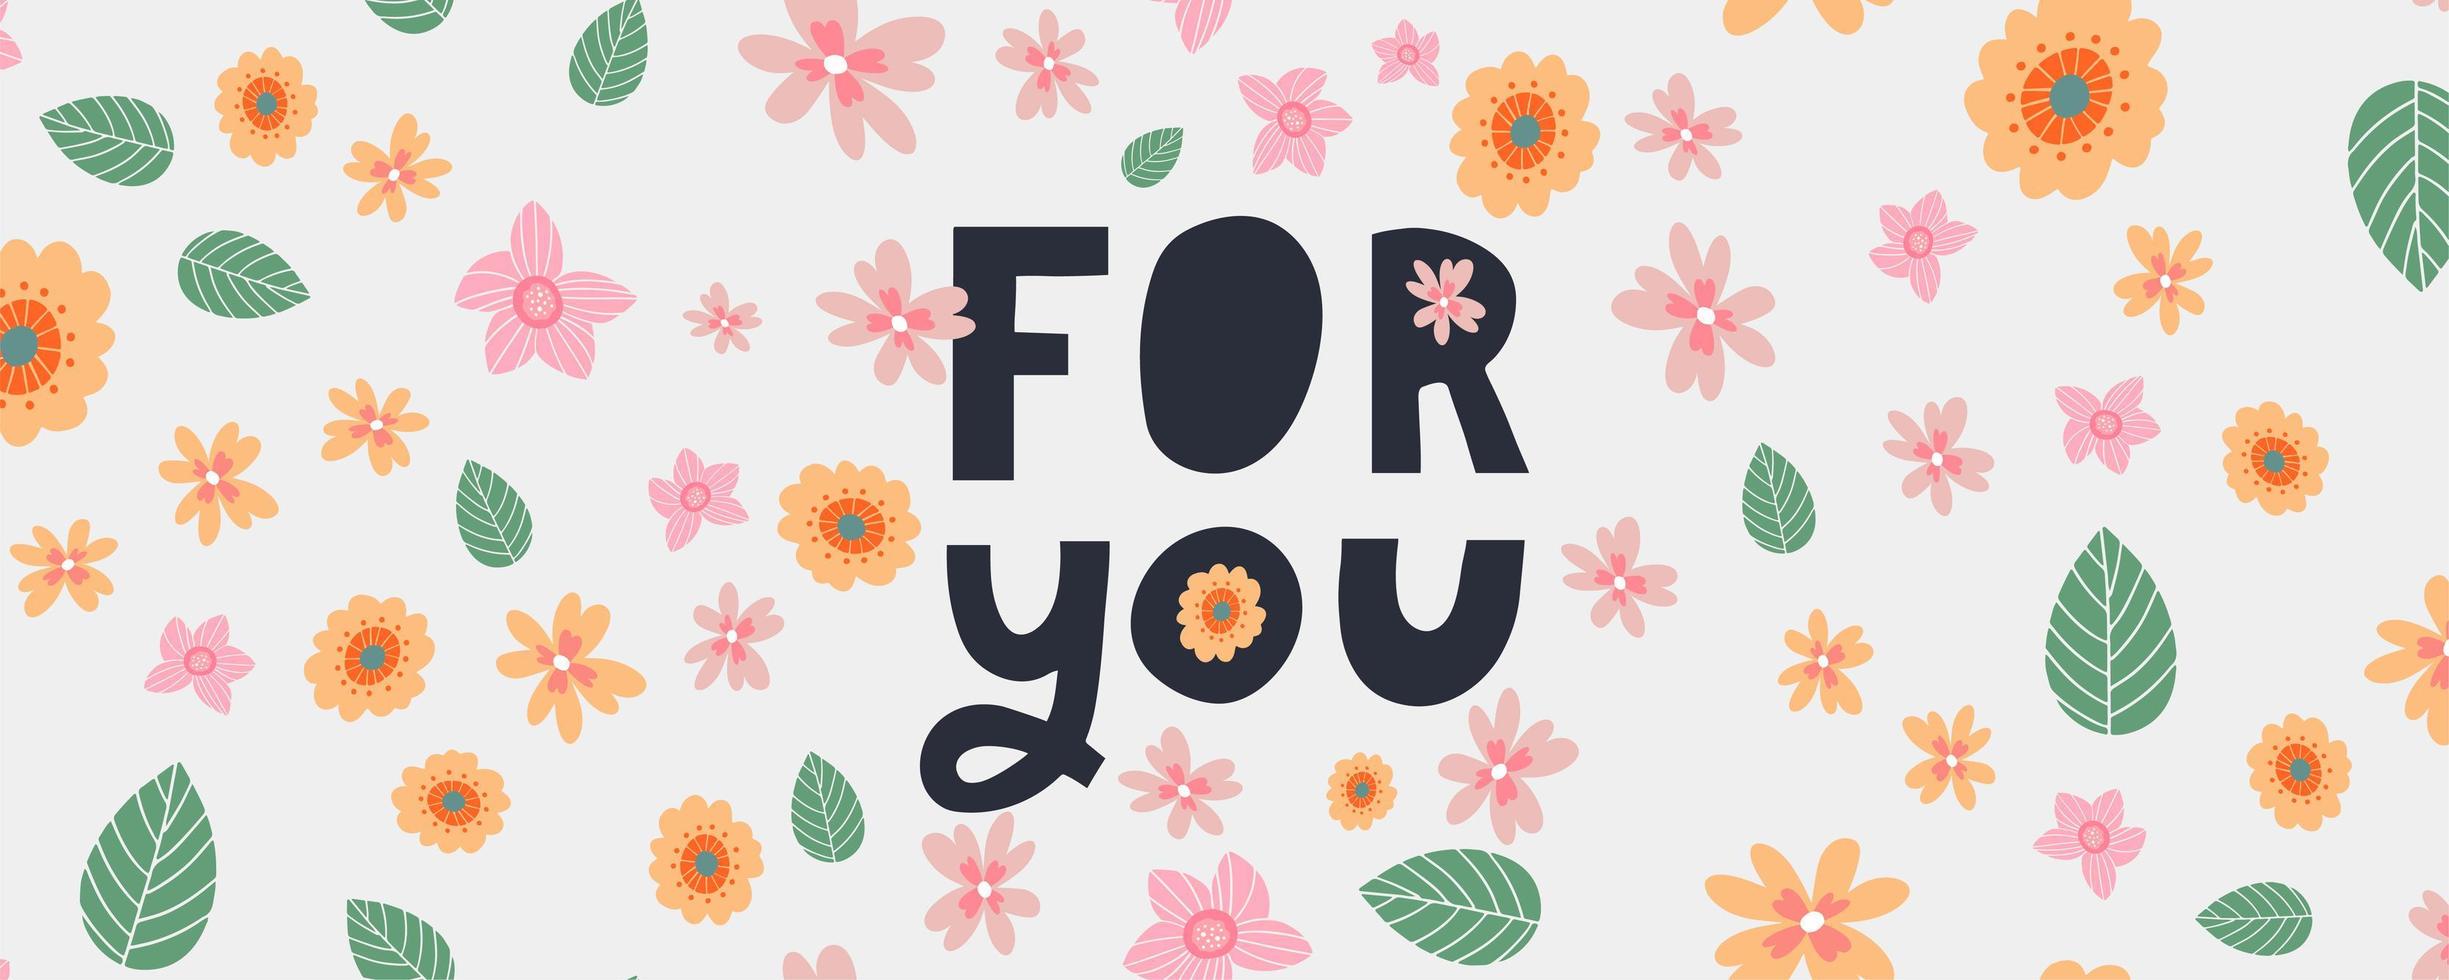 For you text lettering Valentine's day banner with flowers vector